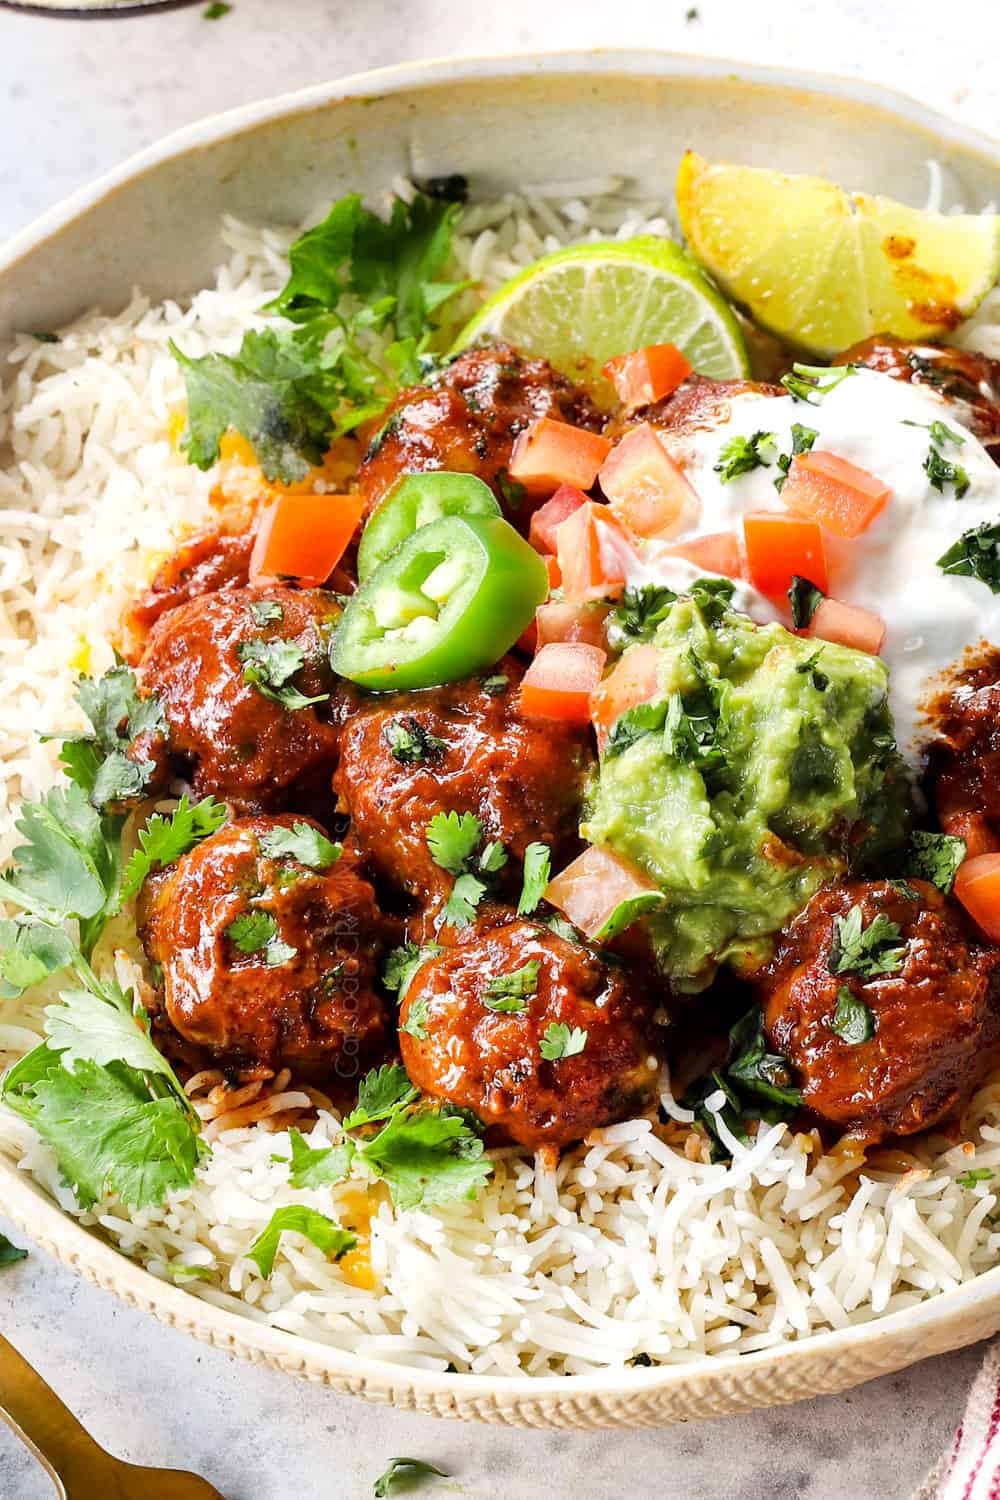 showing how to serve baked enchilada meatballs by adding to a bowl with rice and topping with sour cream, guacamole, tomatoes and cilantro